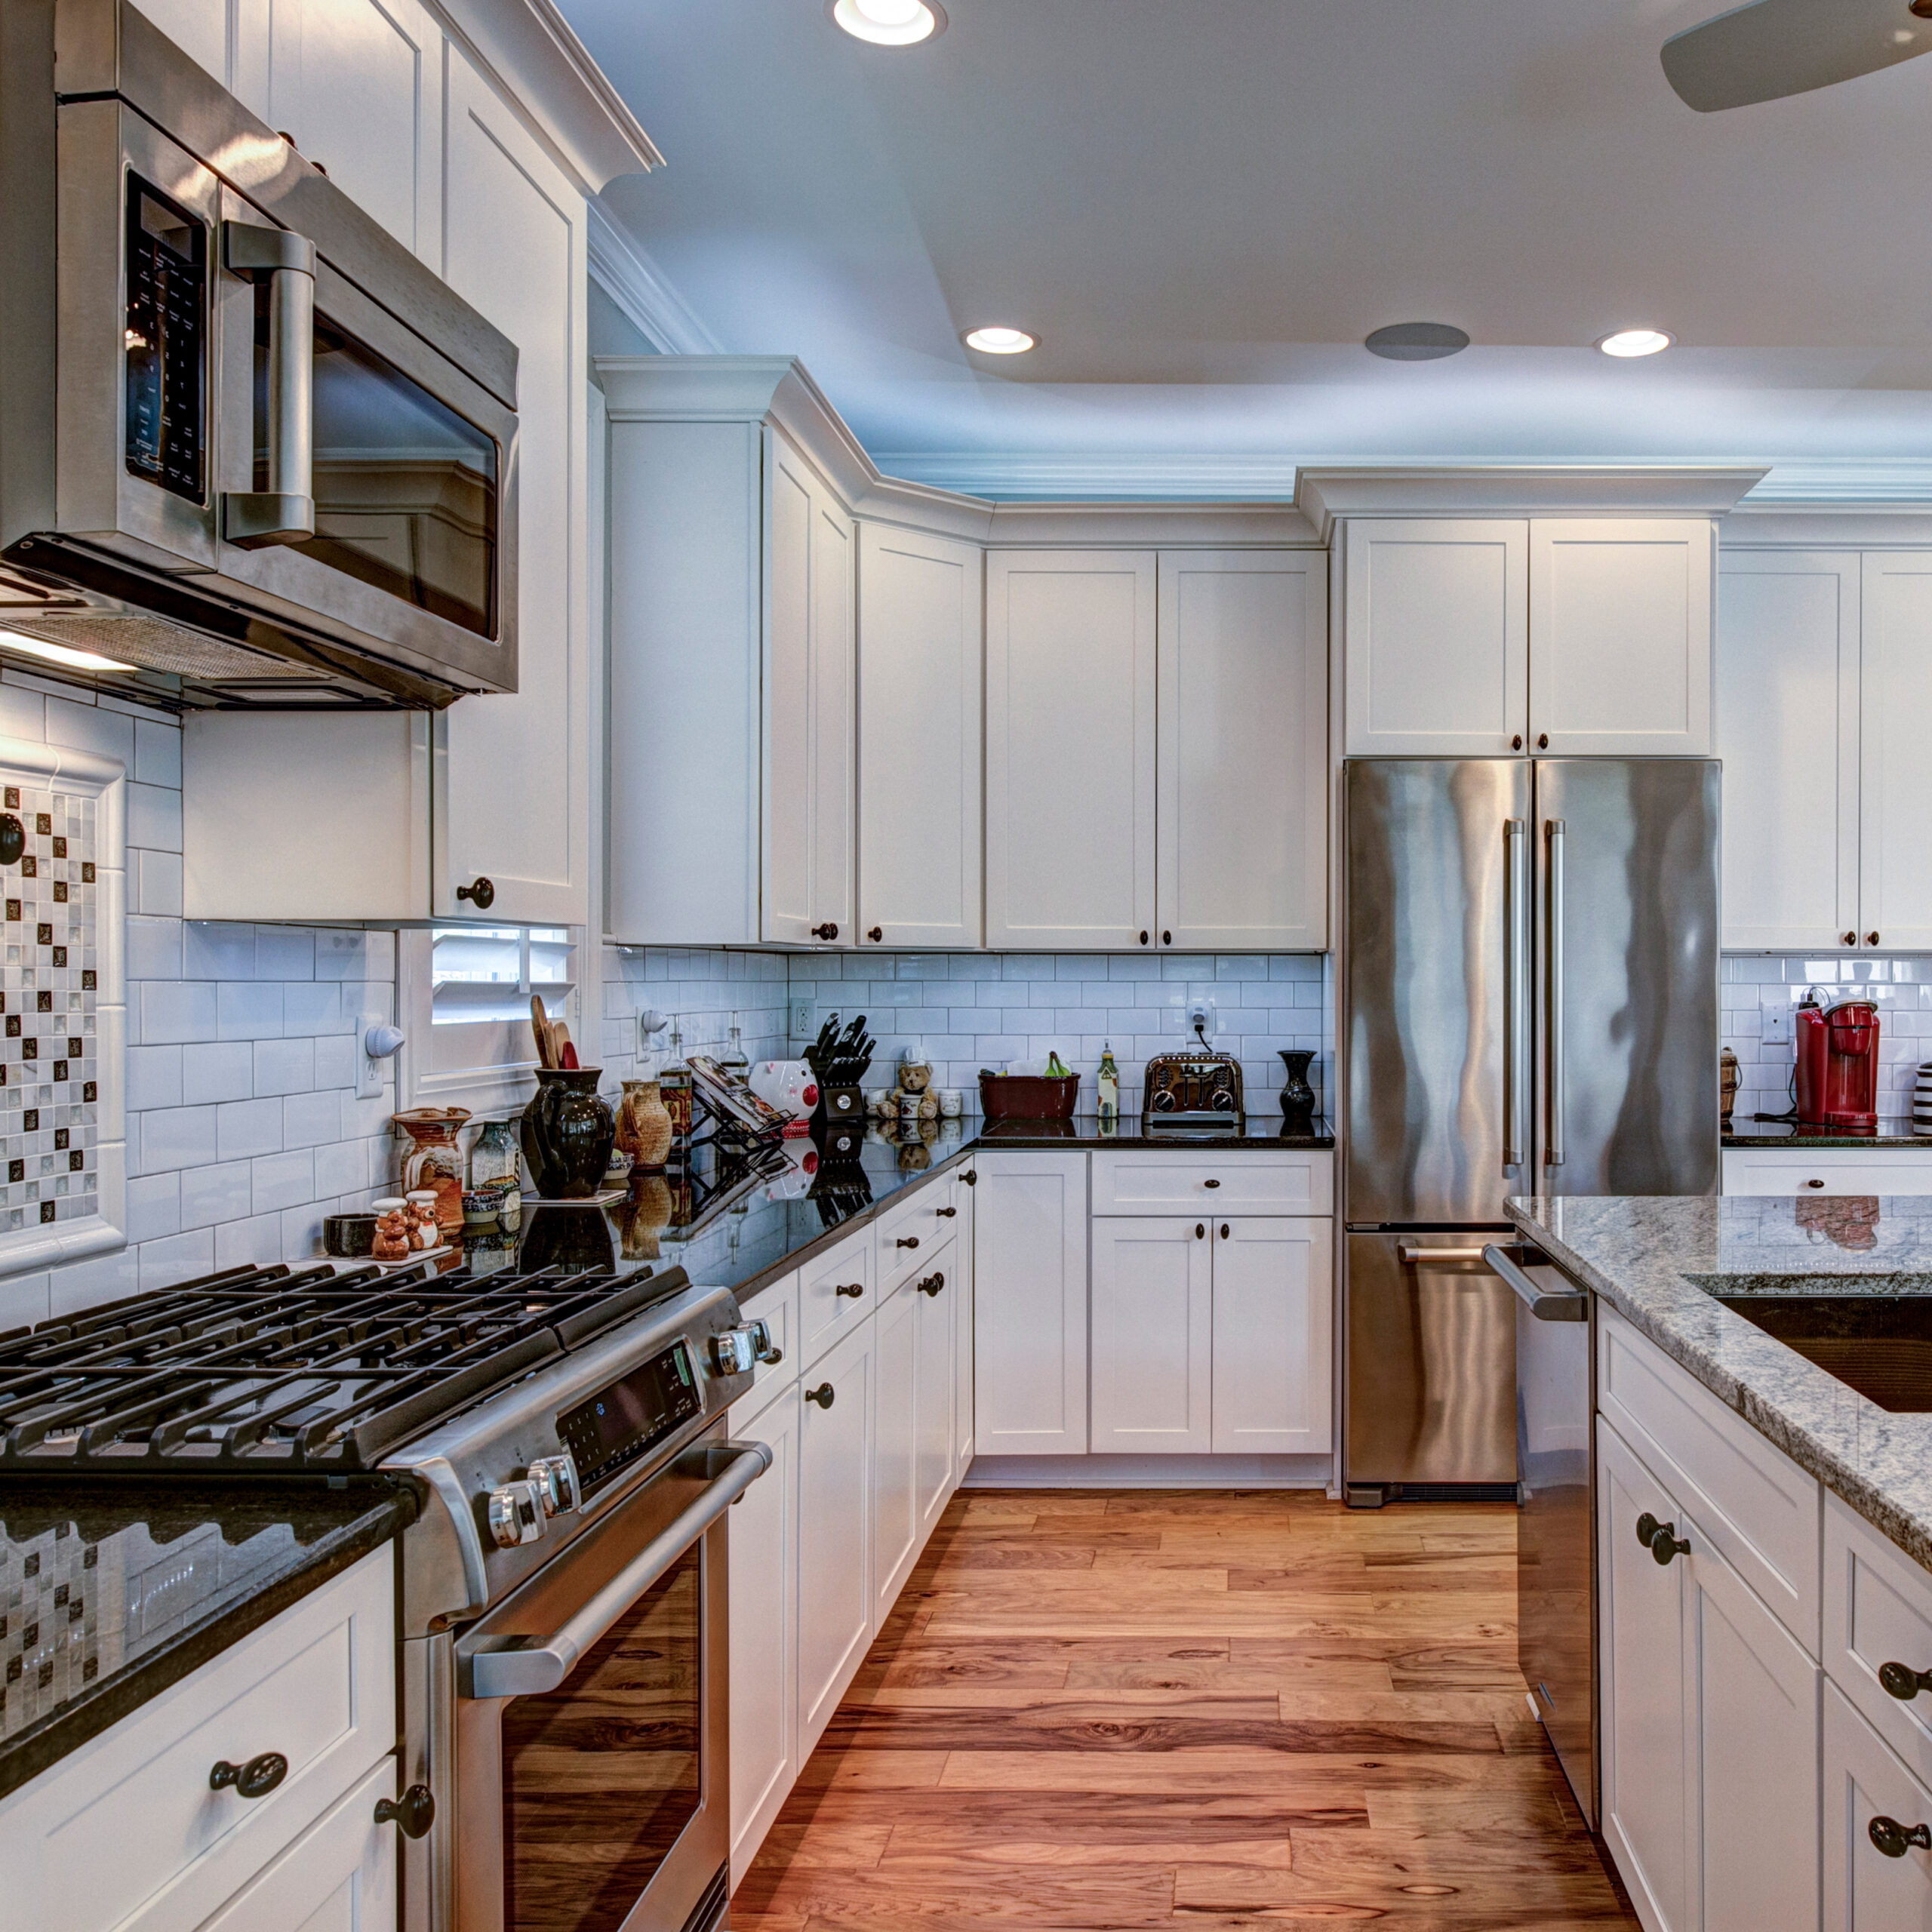 Benchmark Construction Company | Kitchen remodeling Contractors